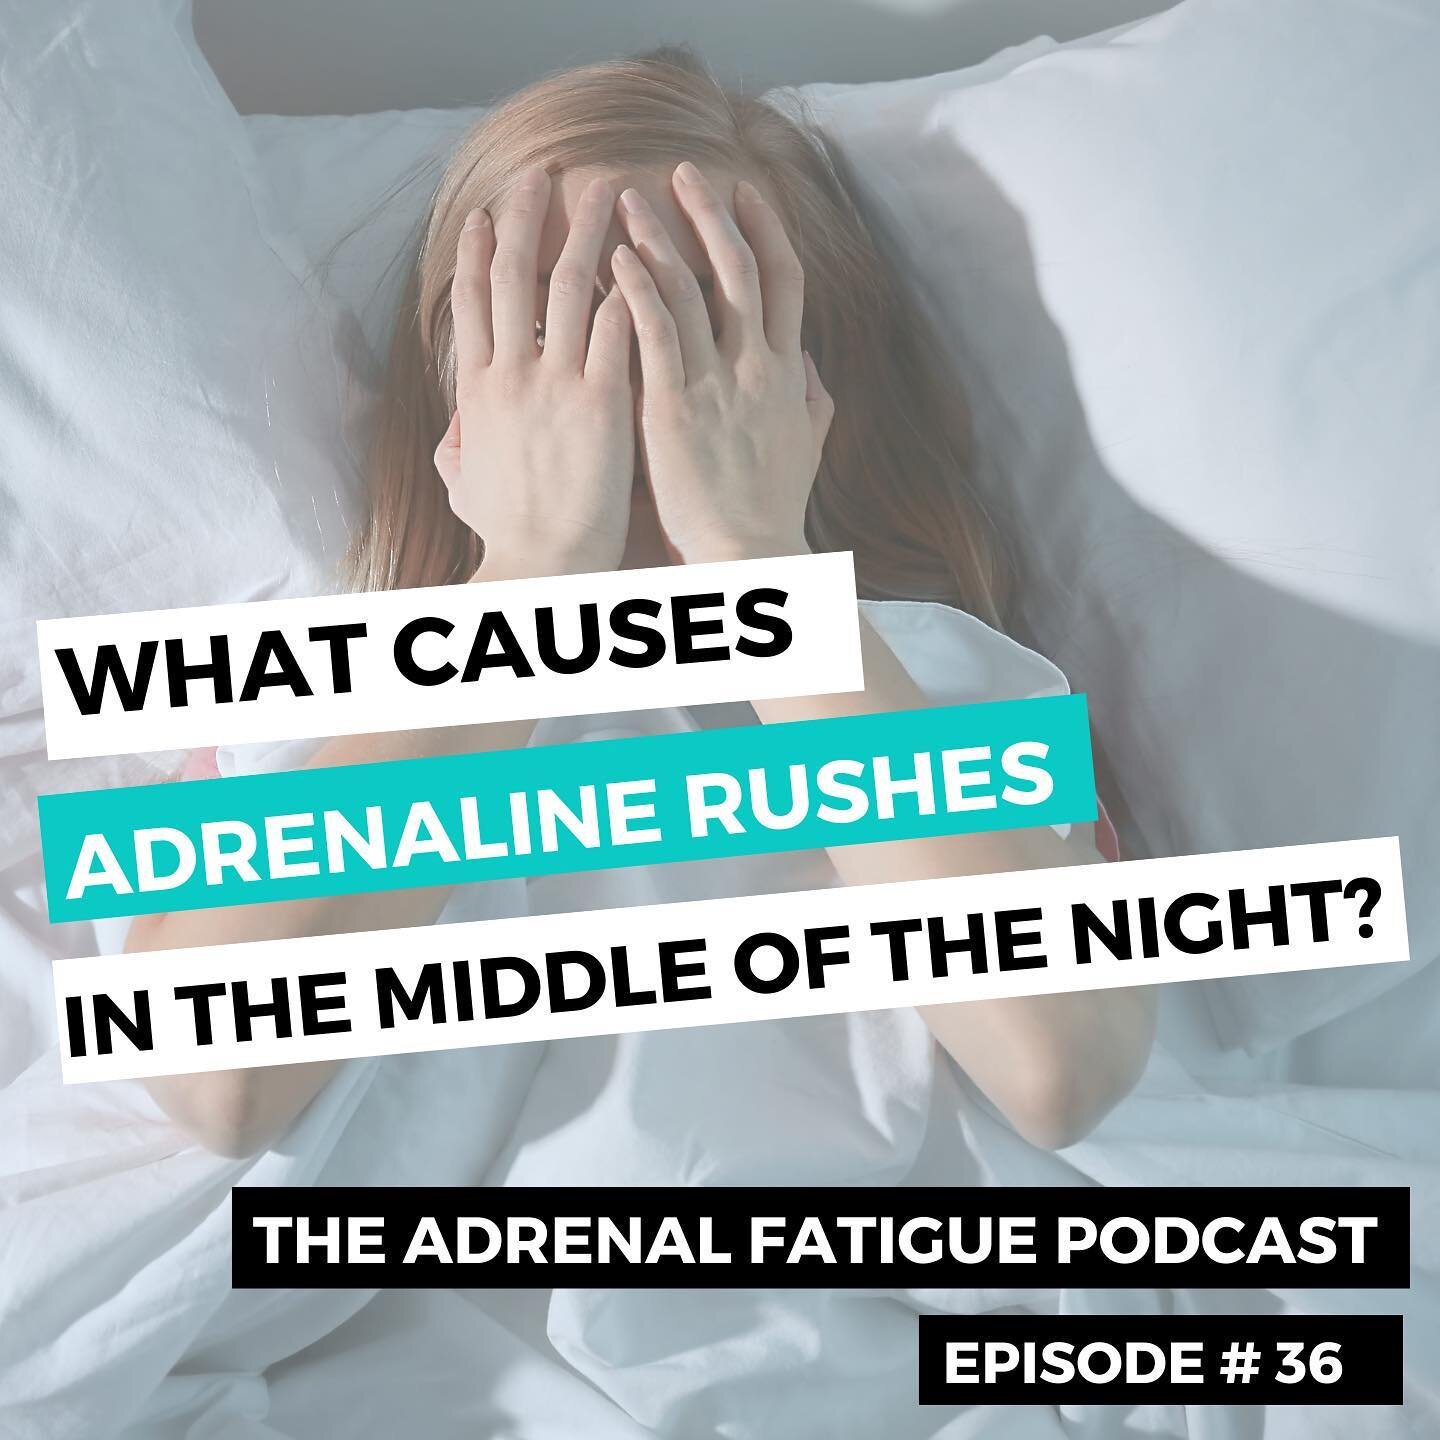 🚨NEW PODCAST, FRESHLY RELEASED 🚨 

In this episode, we chat about adrenaline rushes-- what they are and why we might be getting them in the middle of the night. In this episode, you'll learn how this symptom is often an annoying issue brought about